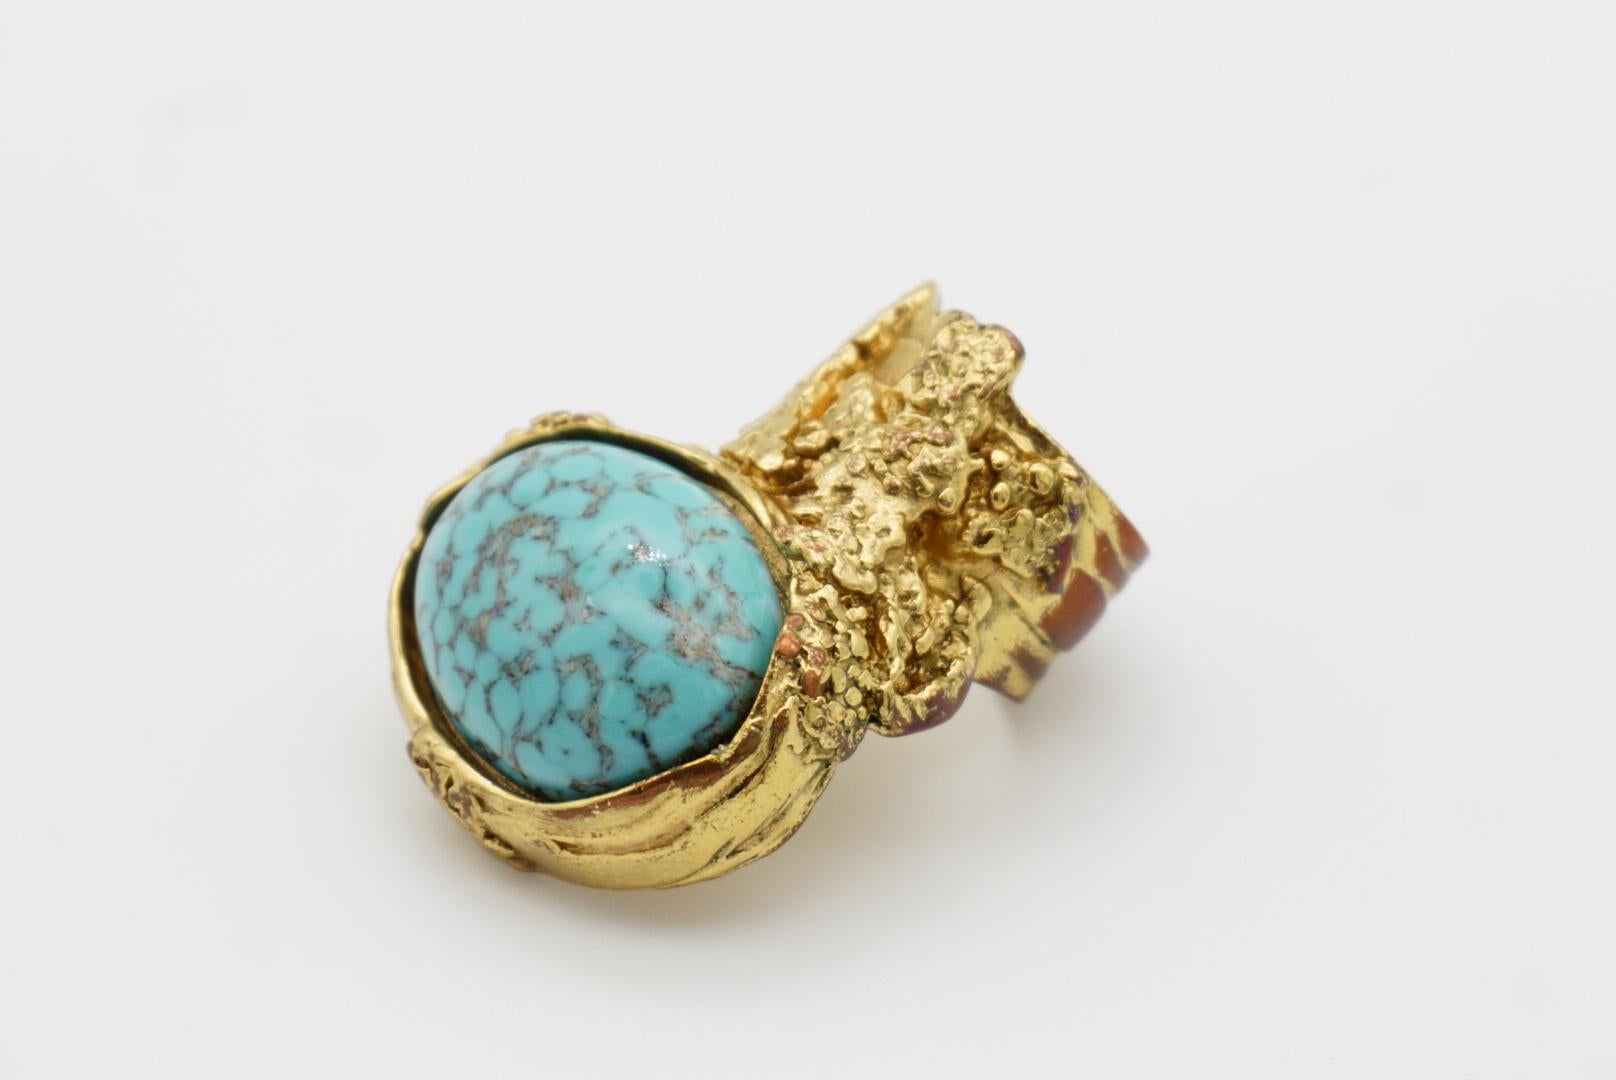 Yves Saint Laurent YSL Arty Turquoise Cabochon Statement Chunky Ring, Size 6 For Sale 4